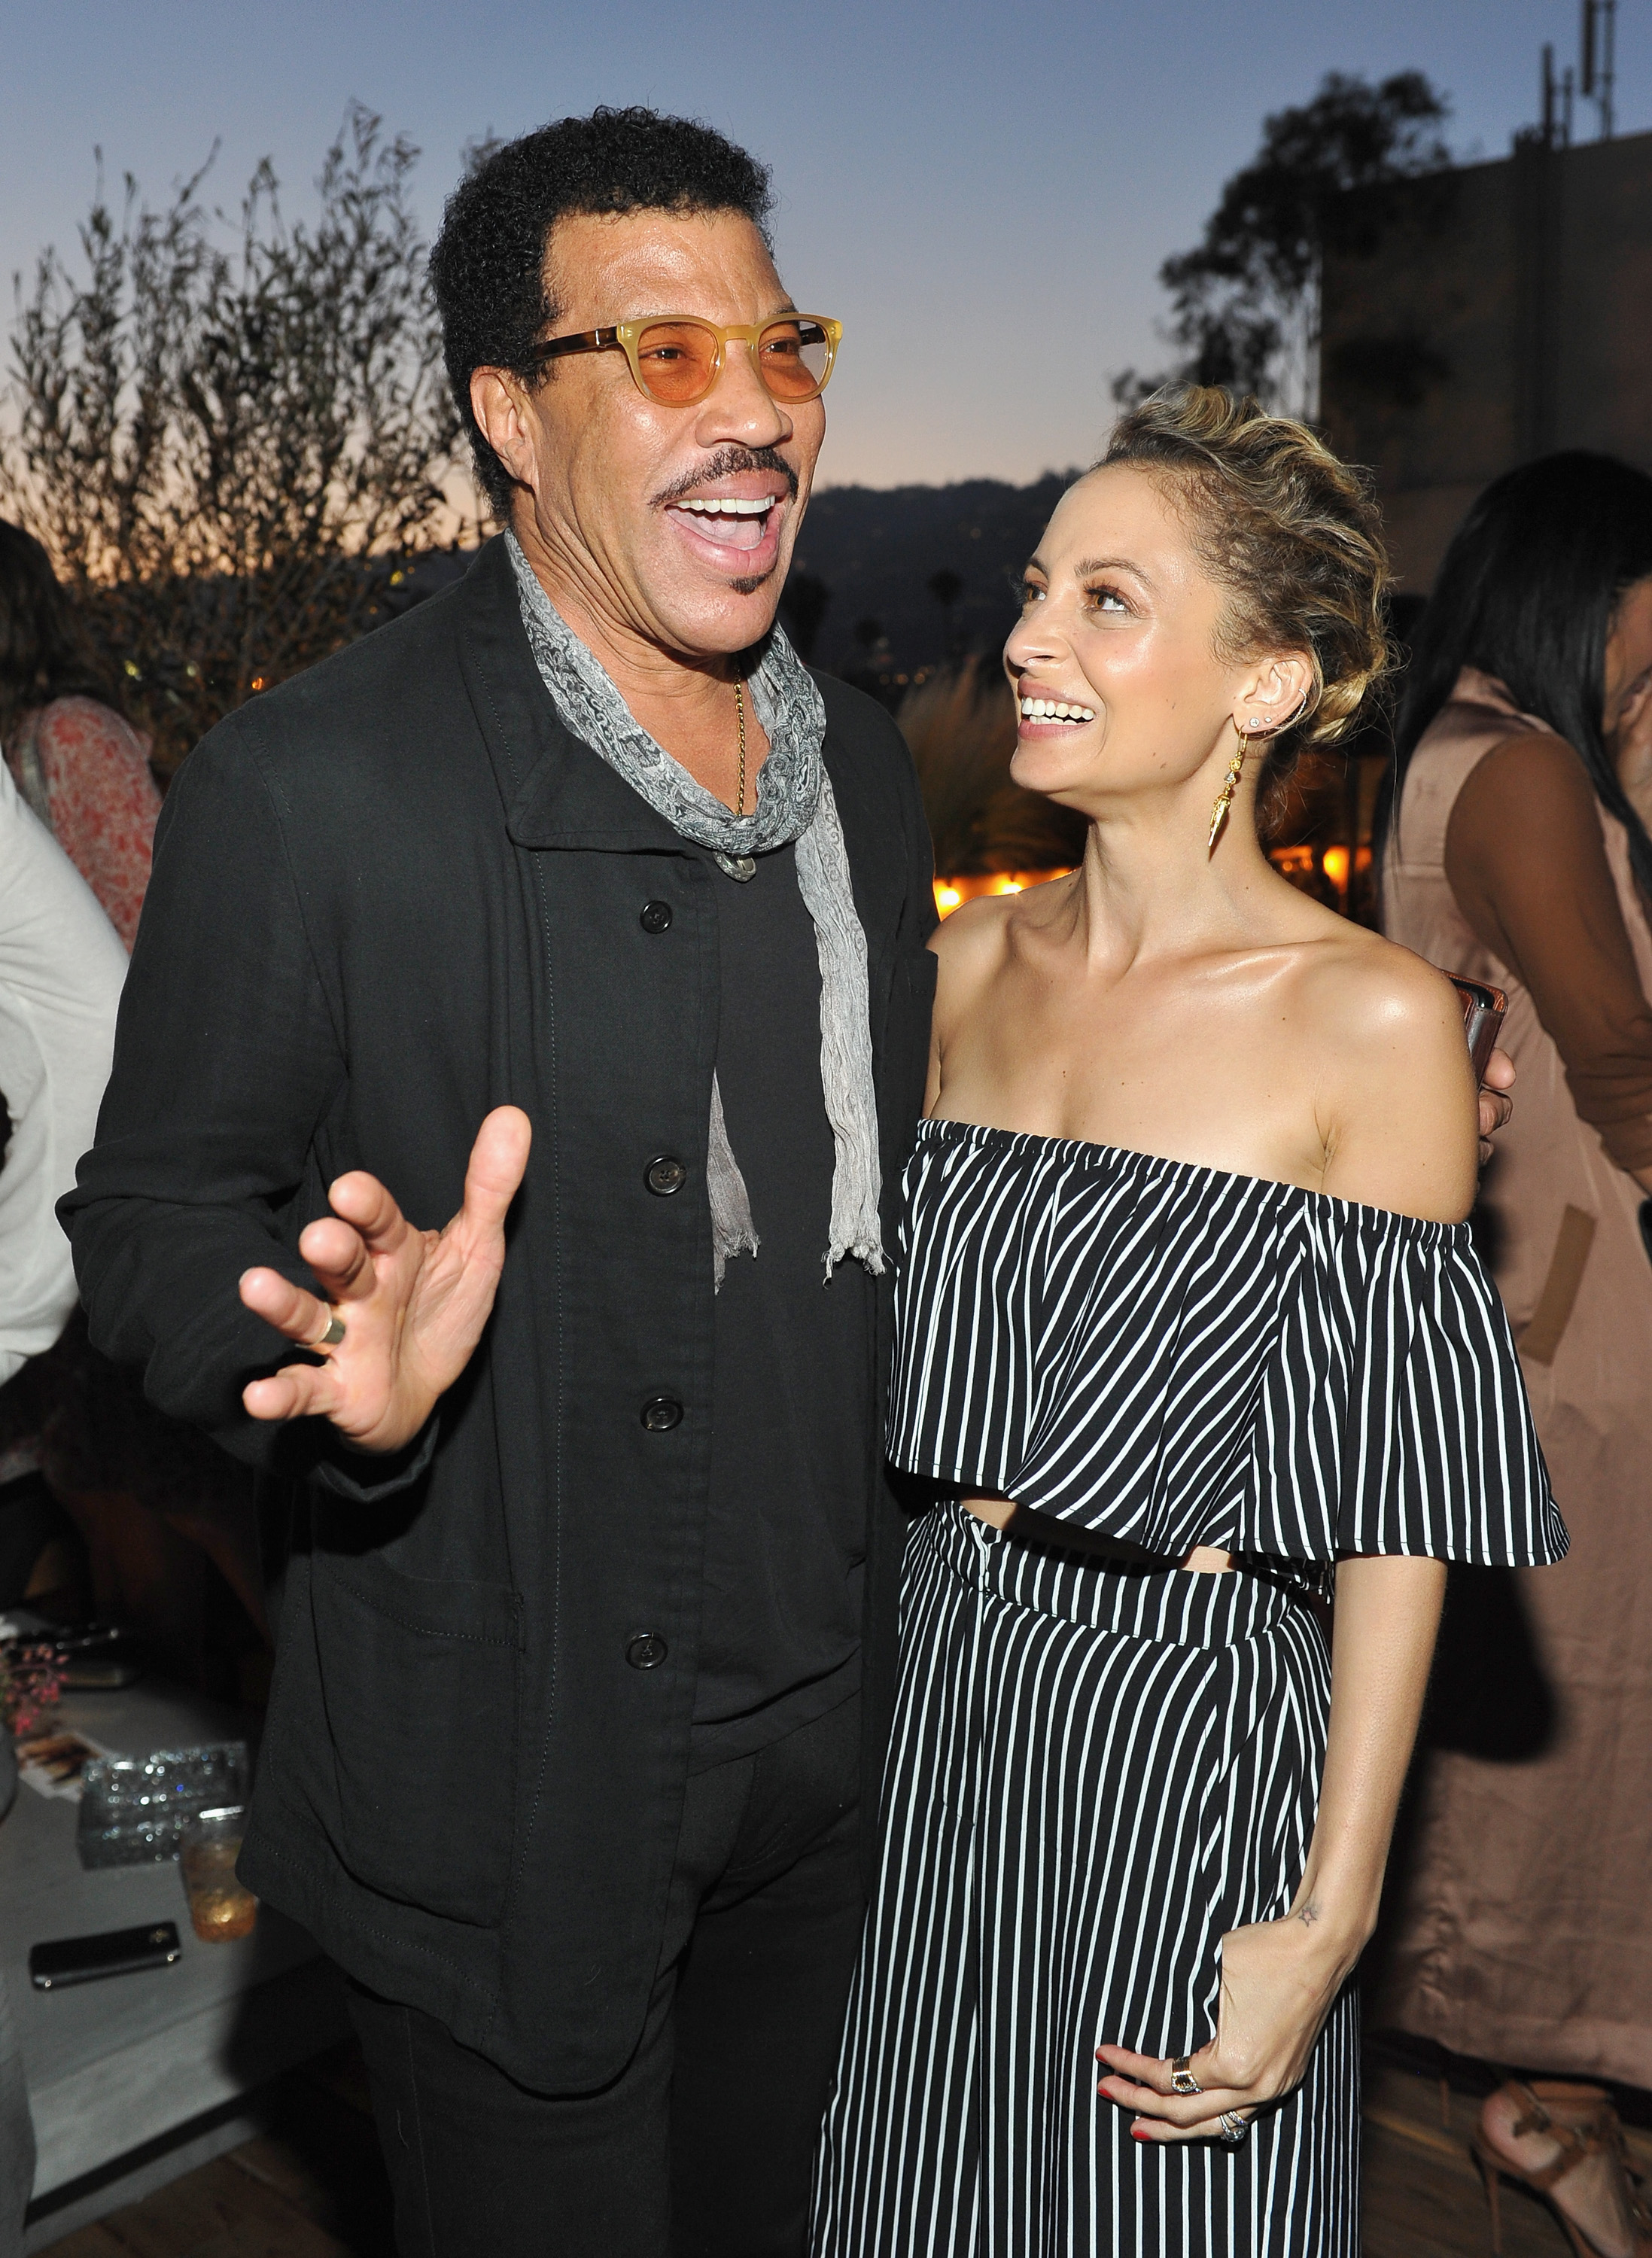 Lionel Richie and Nicole Richie attend House of Harlow 1960 x Revolve on June 2, 2016 in Los Angeles, California. | Source: Getty Images